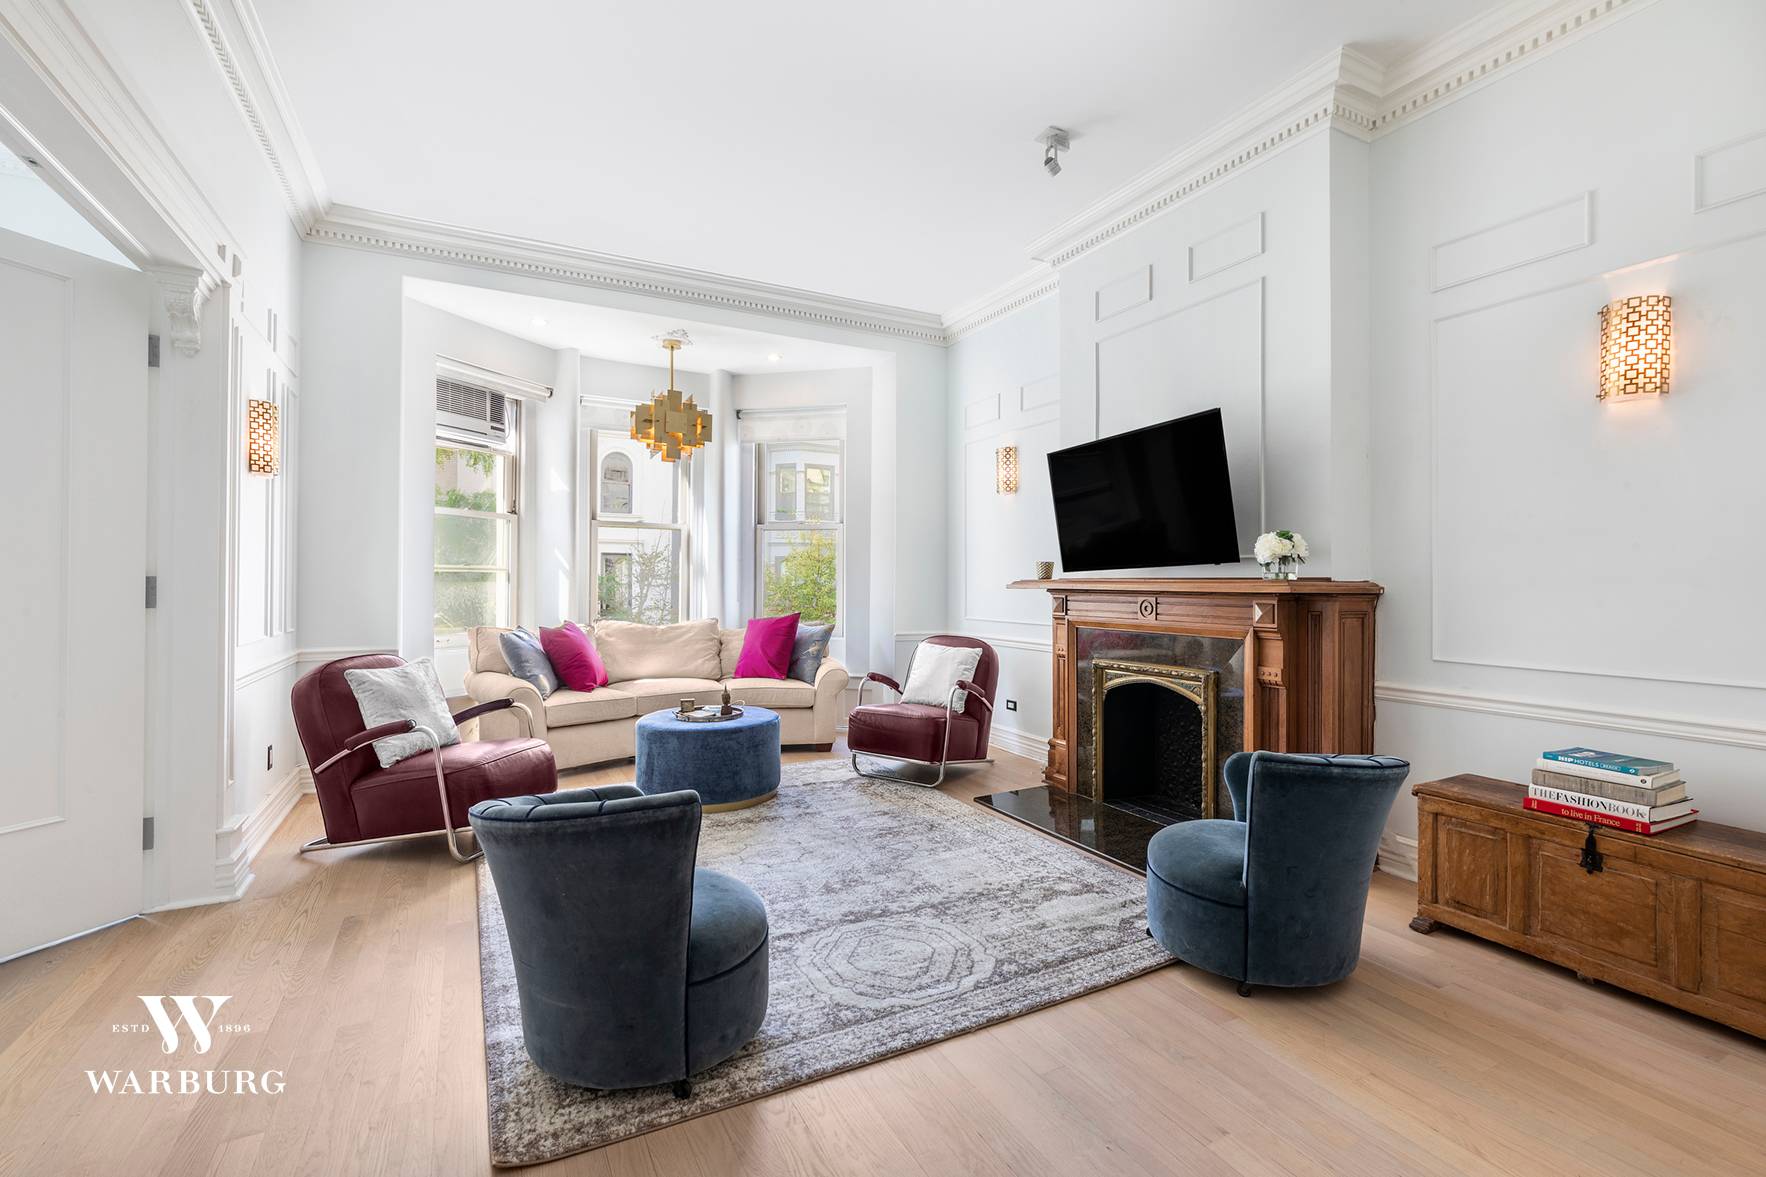 Elegant and refined, this stunning duplex with a spacious terrace is situated on one of Carnegie Hill's most beautiful treelined blocks, in an impressive 25' wide limestone mansion with a ...